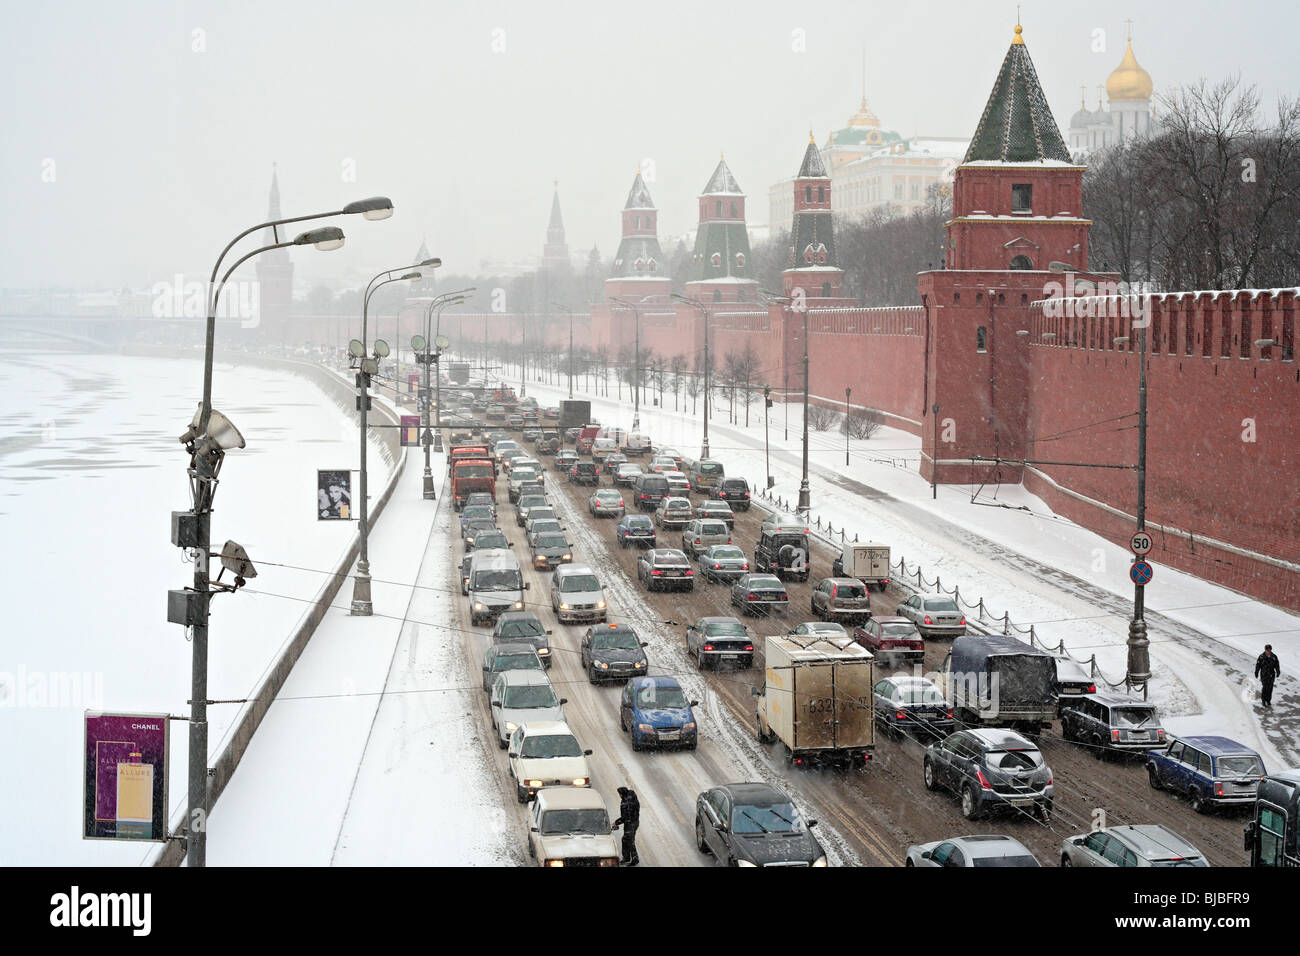 City traffic at snowy winter day, Kremlin embankment, Moscow, Russia Stock Photo